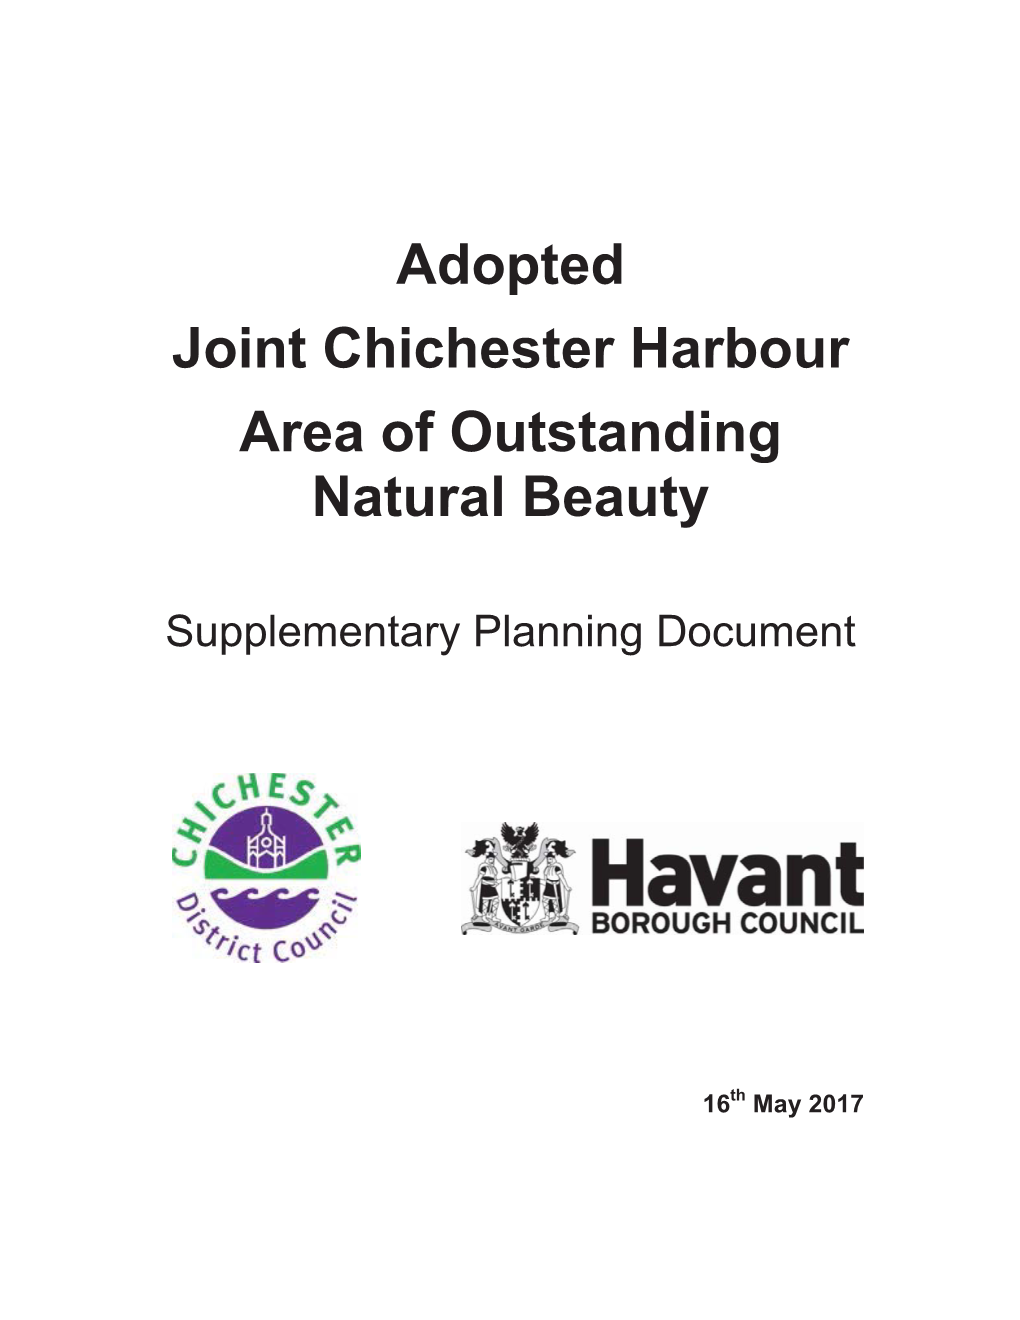 Joint Chichester Harbour Area of Outstanding Natural Beauty Supplementary Planning Document